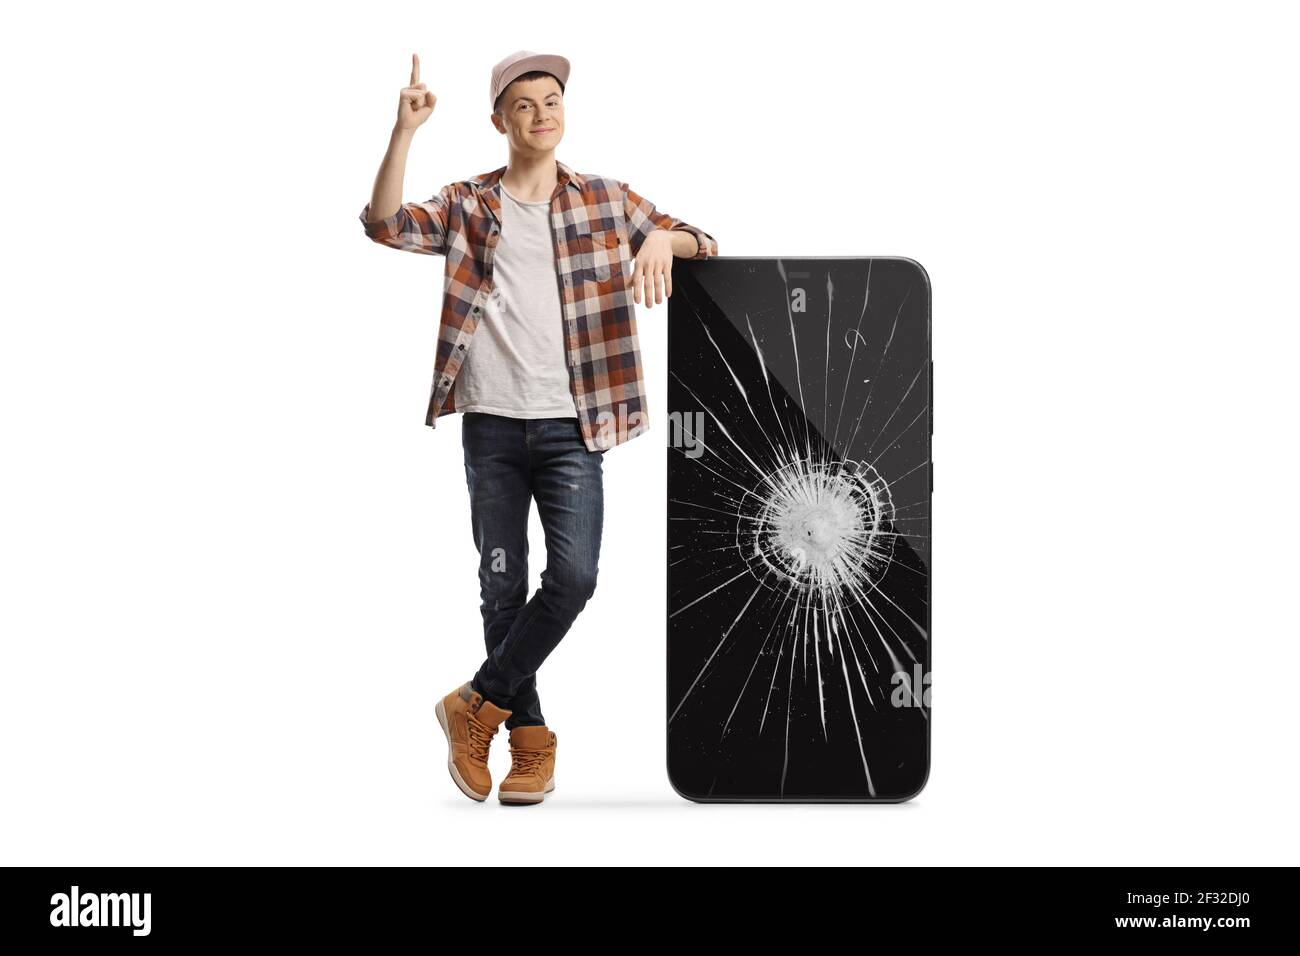 Young male leaning on a phone with a broken screen and pointing up isolated on white background Stock Photo